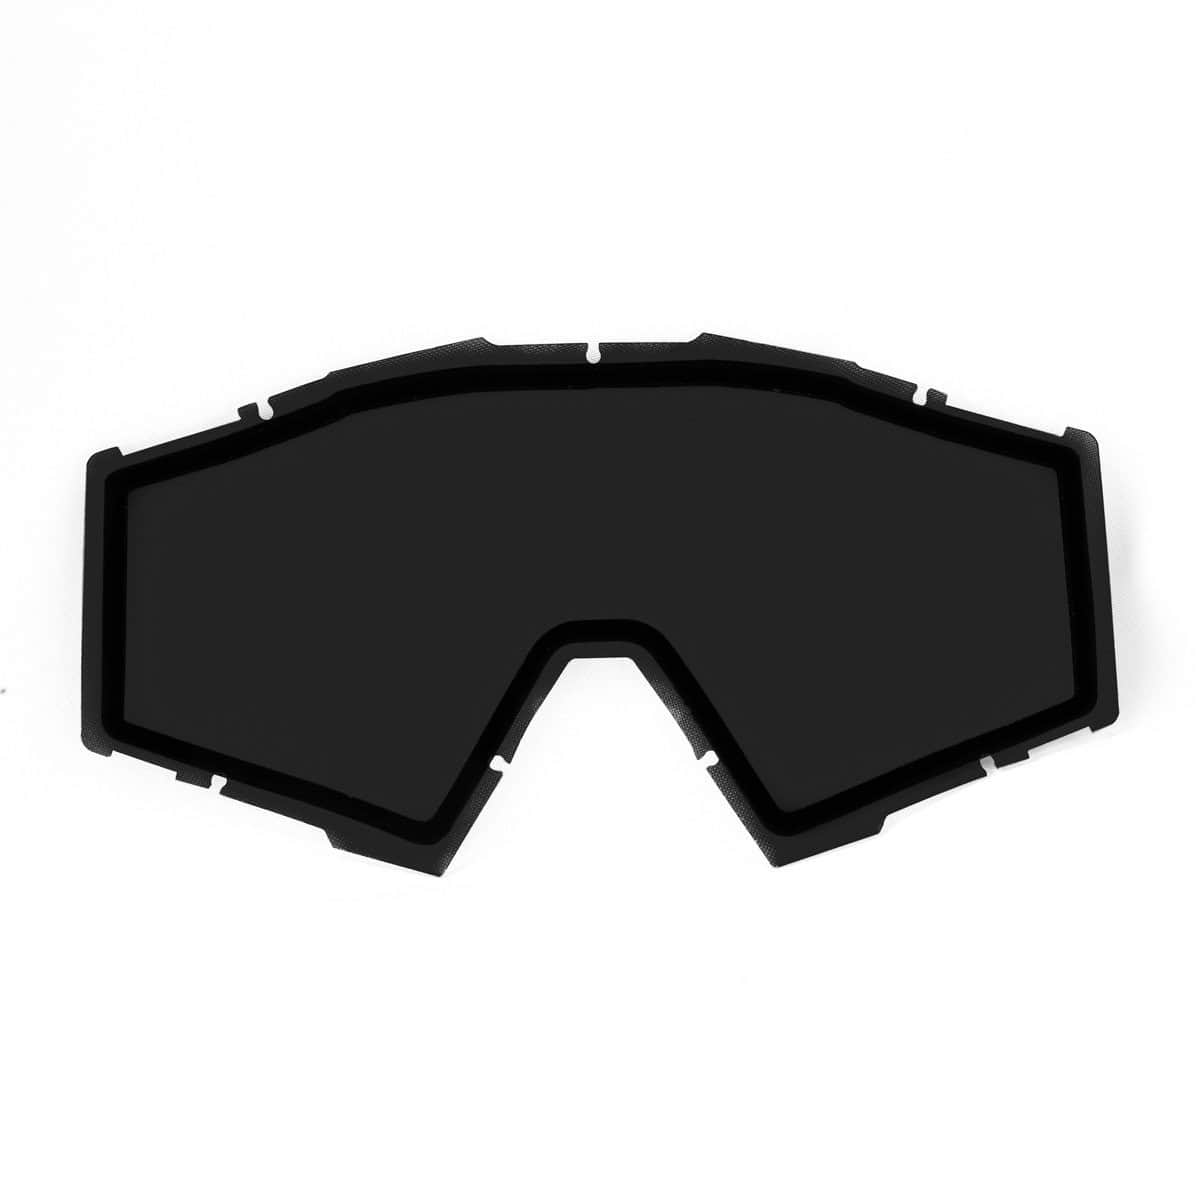 VOSS ONE GOGGLES DOUBLE LENS - Voss Helmets